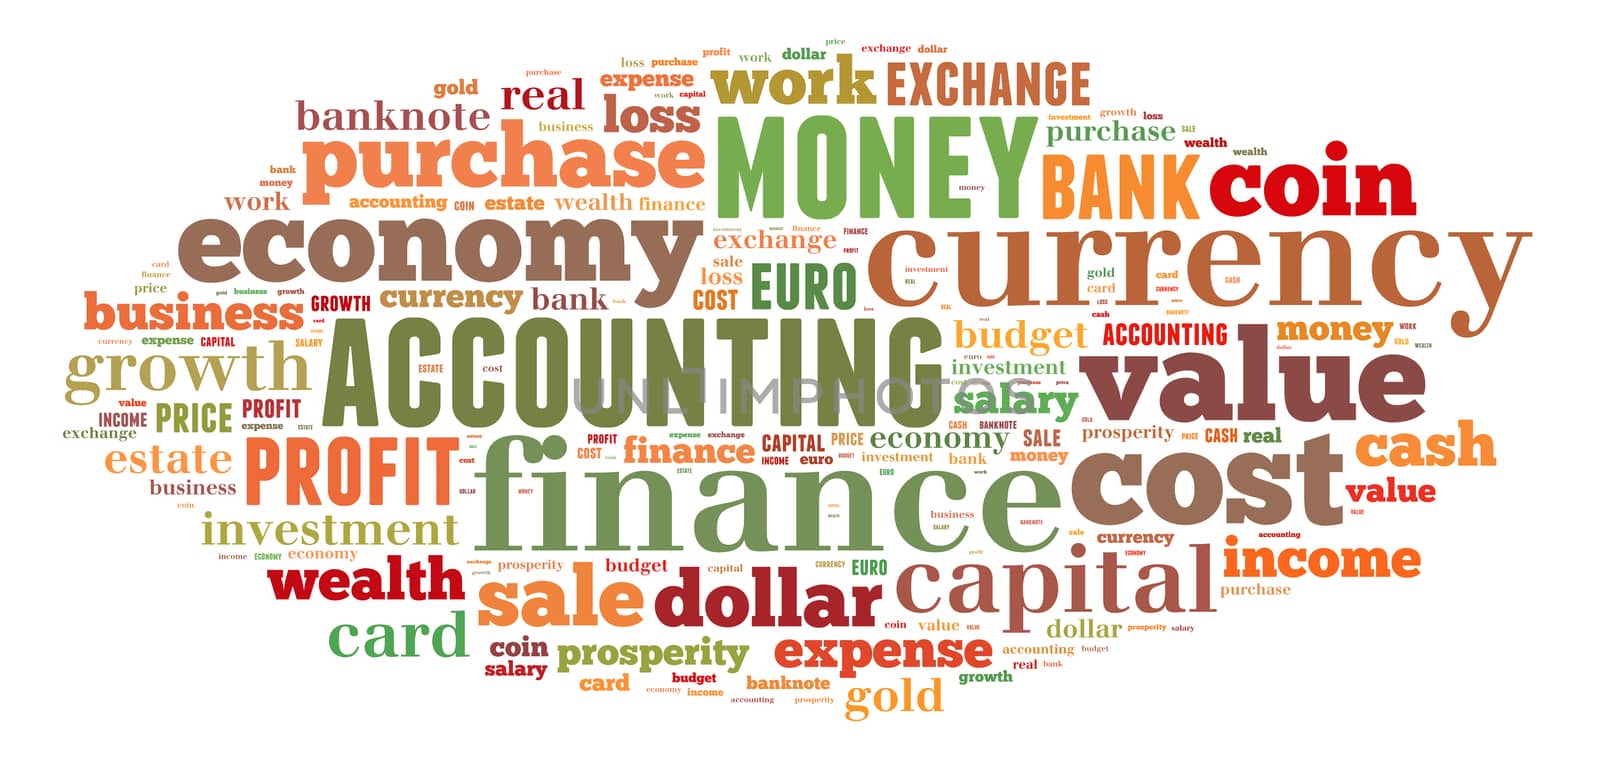 wordcloud illustration of finance and business words by artush